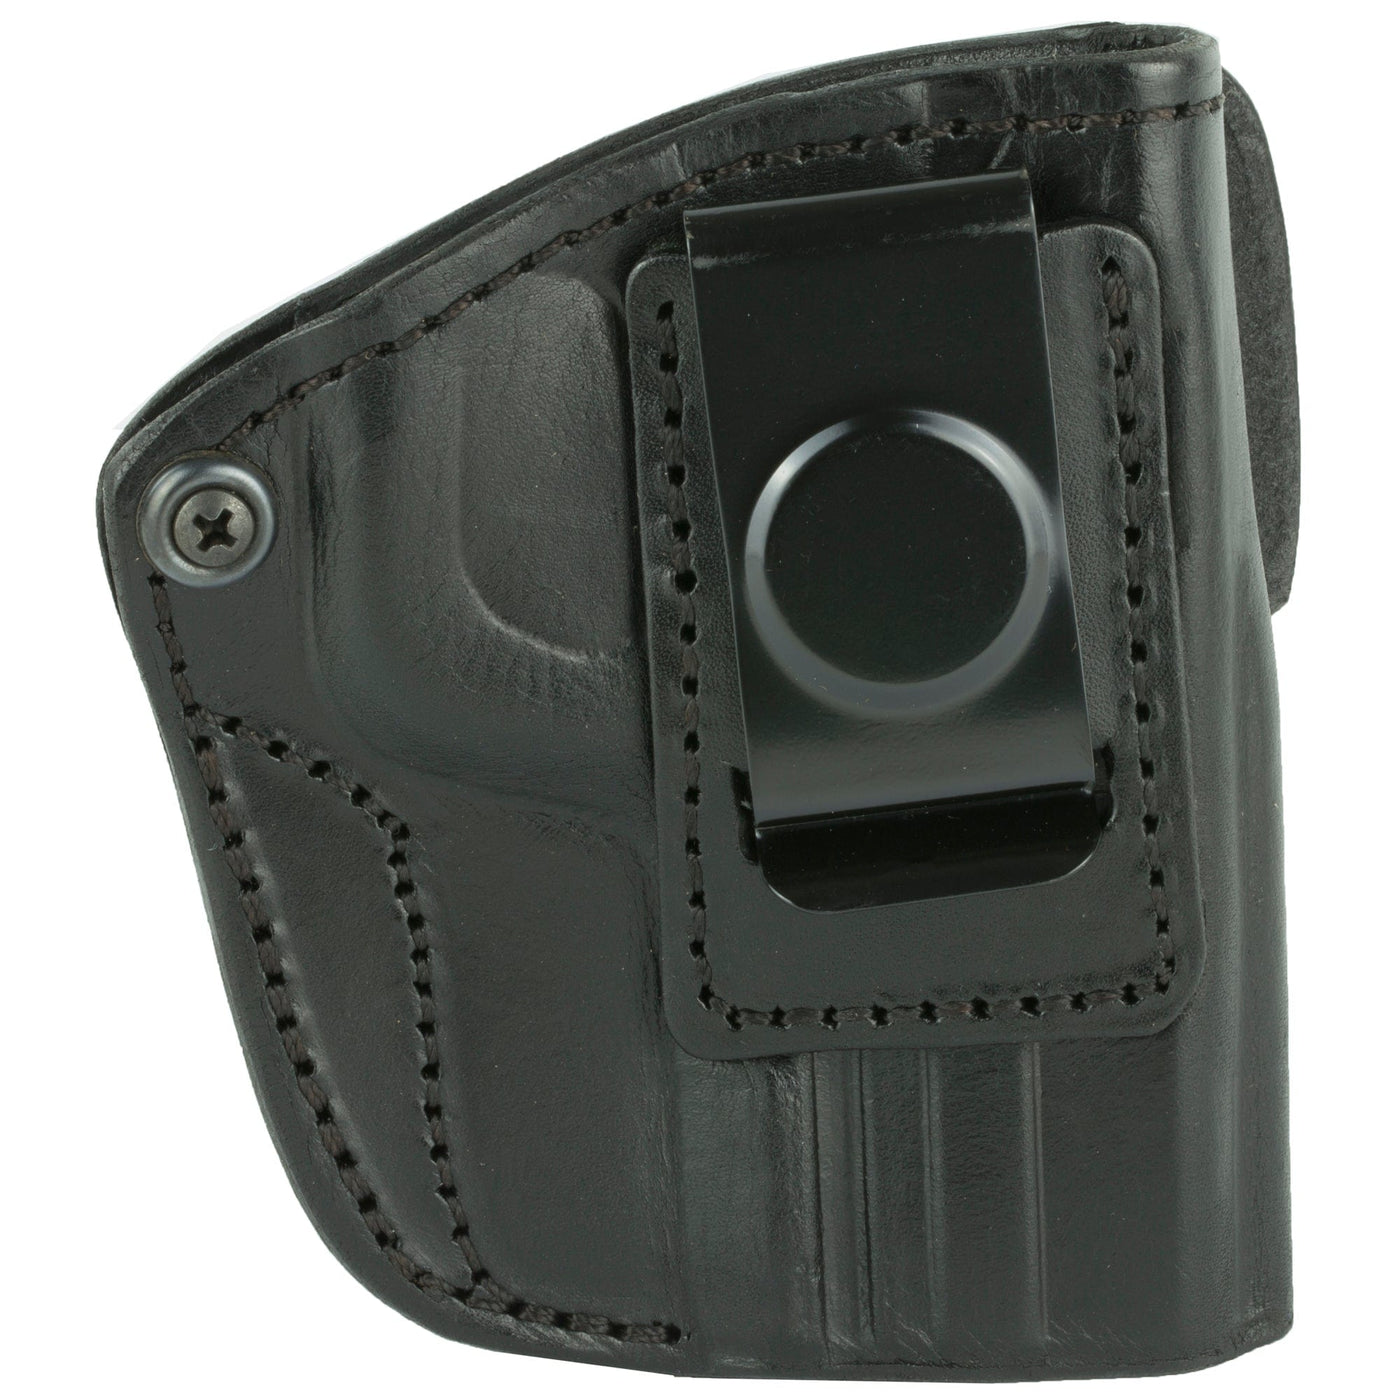 Tagua Tagua Iph 4-in-1 Sw Mp Rh Blk Holsters